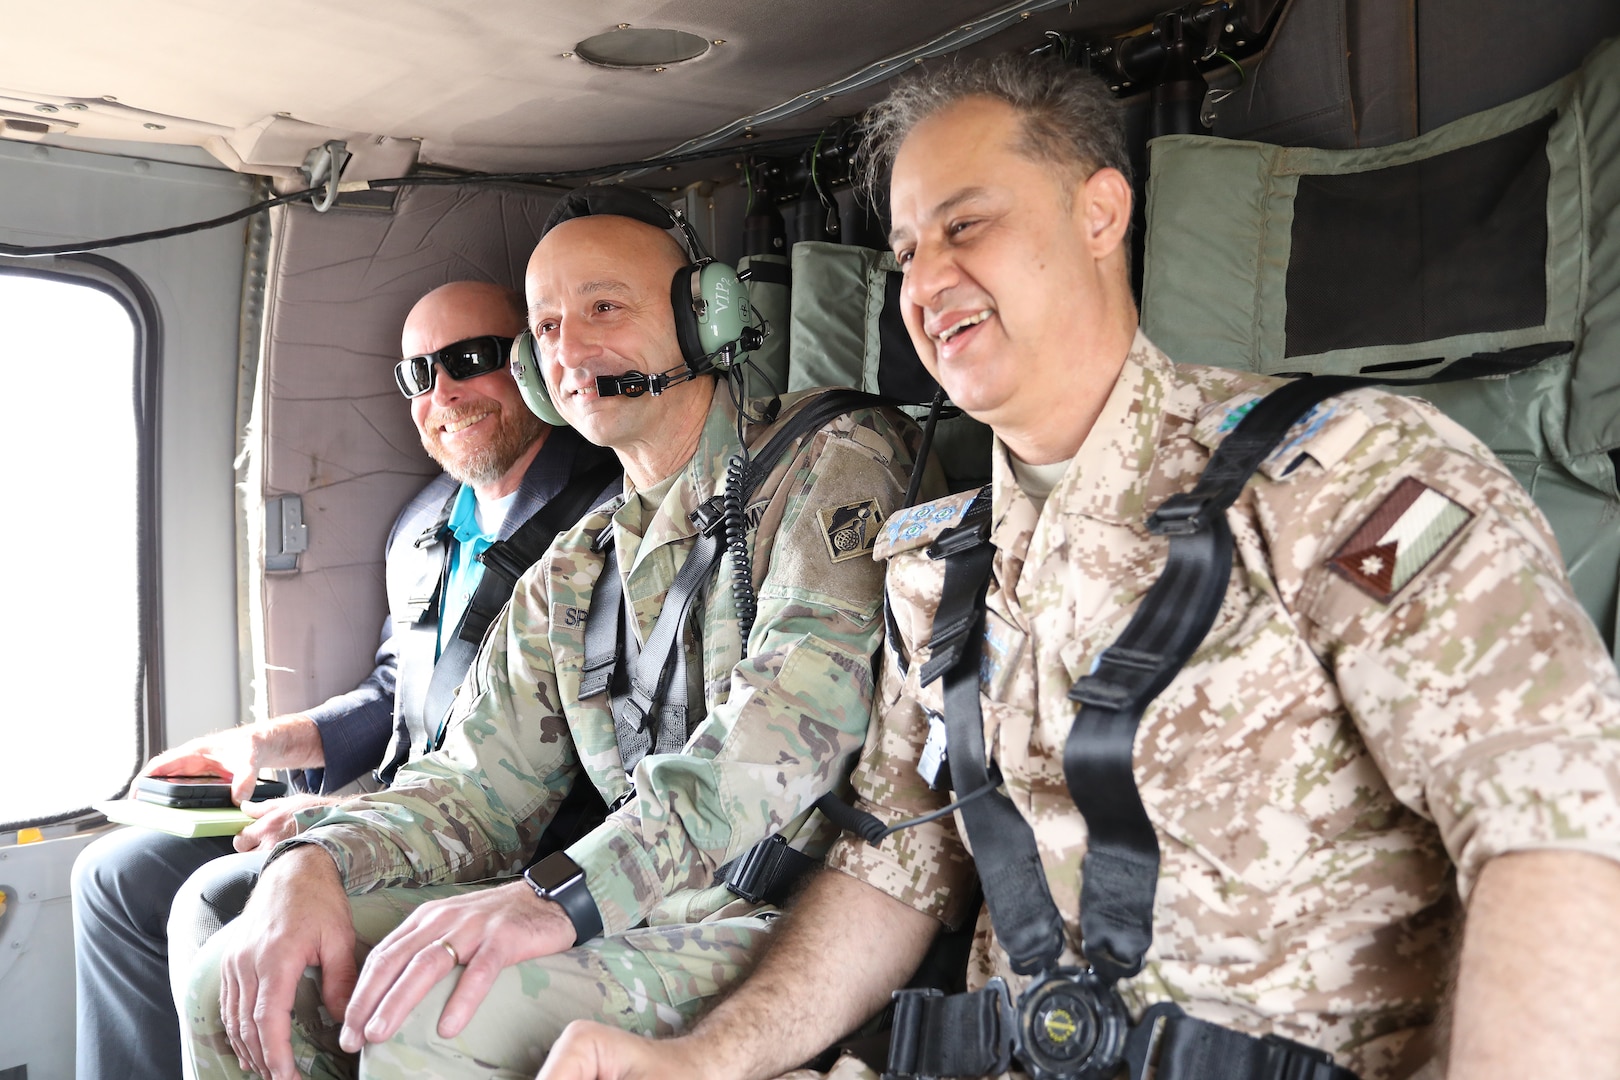 Lt. Gen Scott Spellmon, the 55th Chief of Engineers, flying from Amman to Muwaffaq Salti Air Base in Jordan aboard a Jordanian Blackhawk helicopter to visit Jordanian aircraft infrastructure projects being built by the U.S. Army Corps of Engineers. The Jordanians willingness to fly the Chief to project sites speaks to the strong relationship USACE has built with their allied nation mission partners in the region.